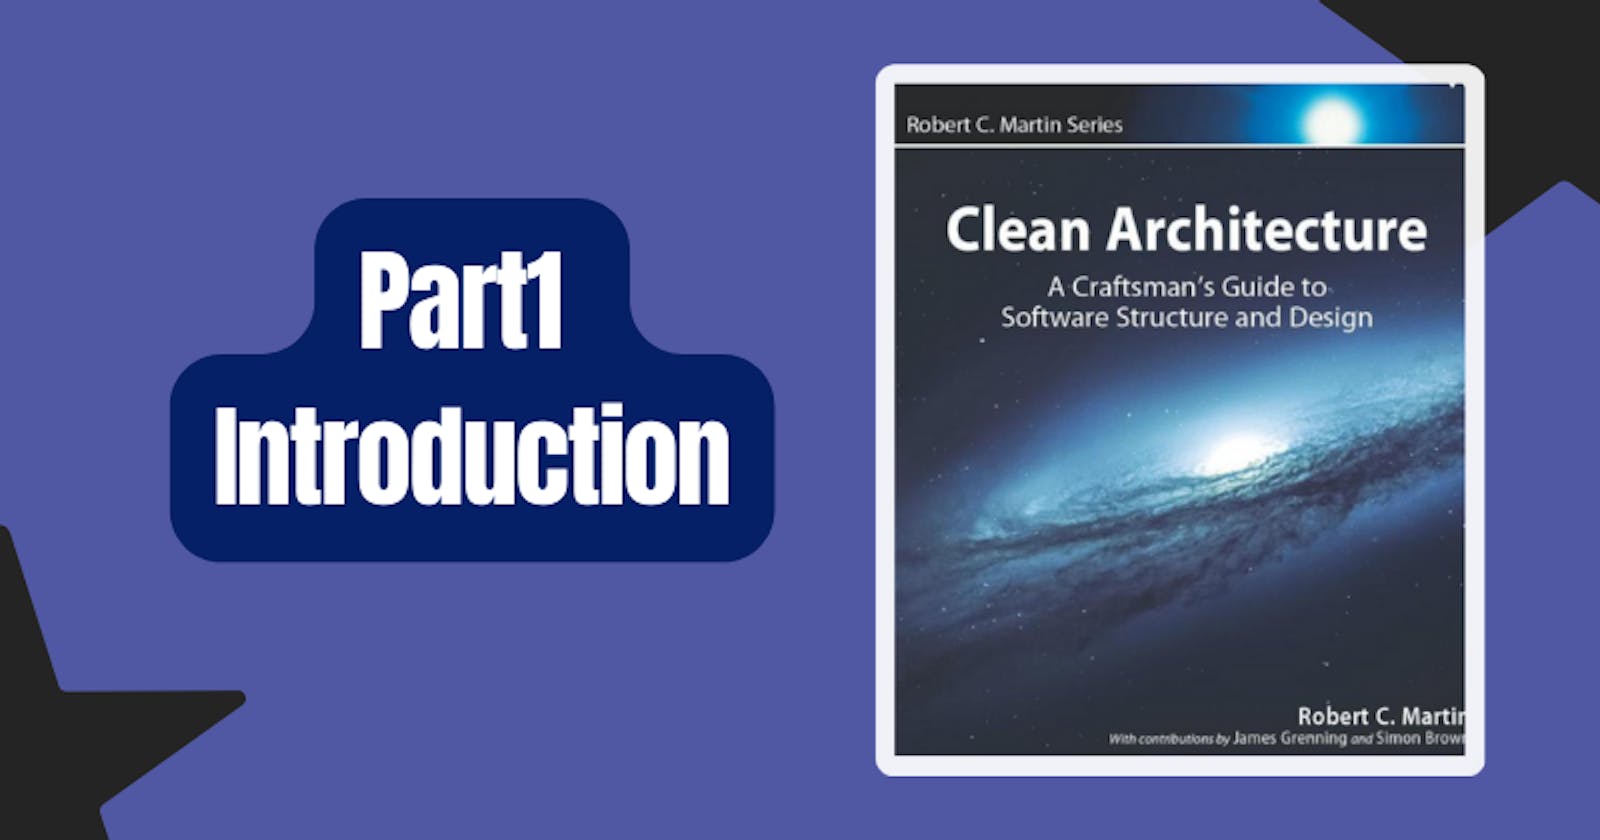 Part1 - Introduction (Clean Architecture by Robert C.Martin)